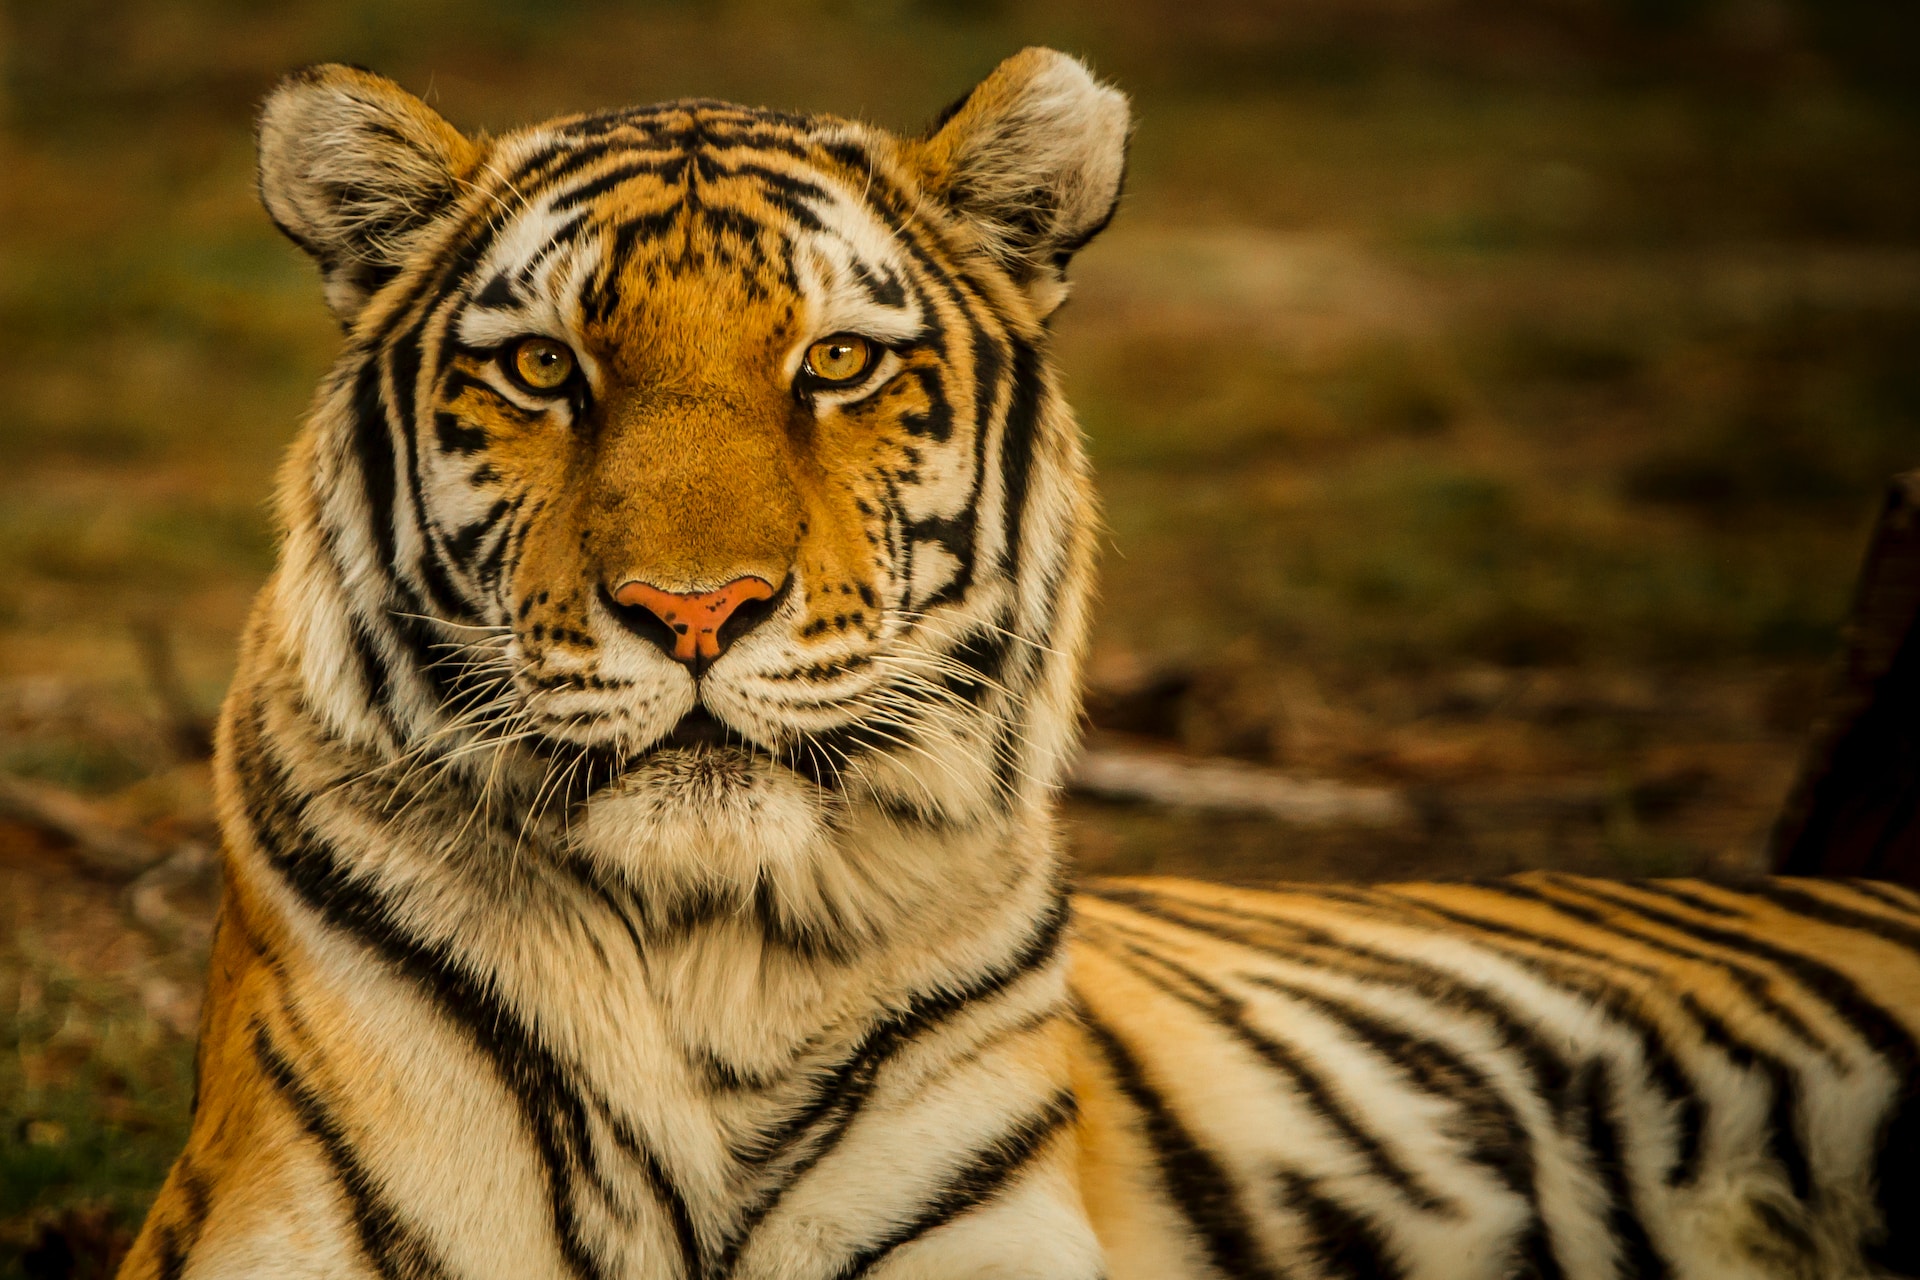 Siberian Tigers Have Human Like Qualities, Study Finds